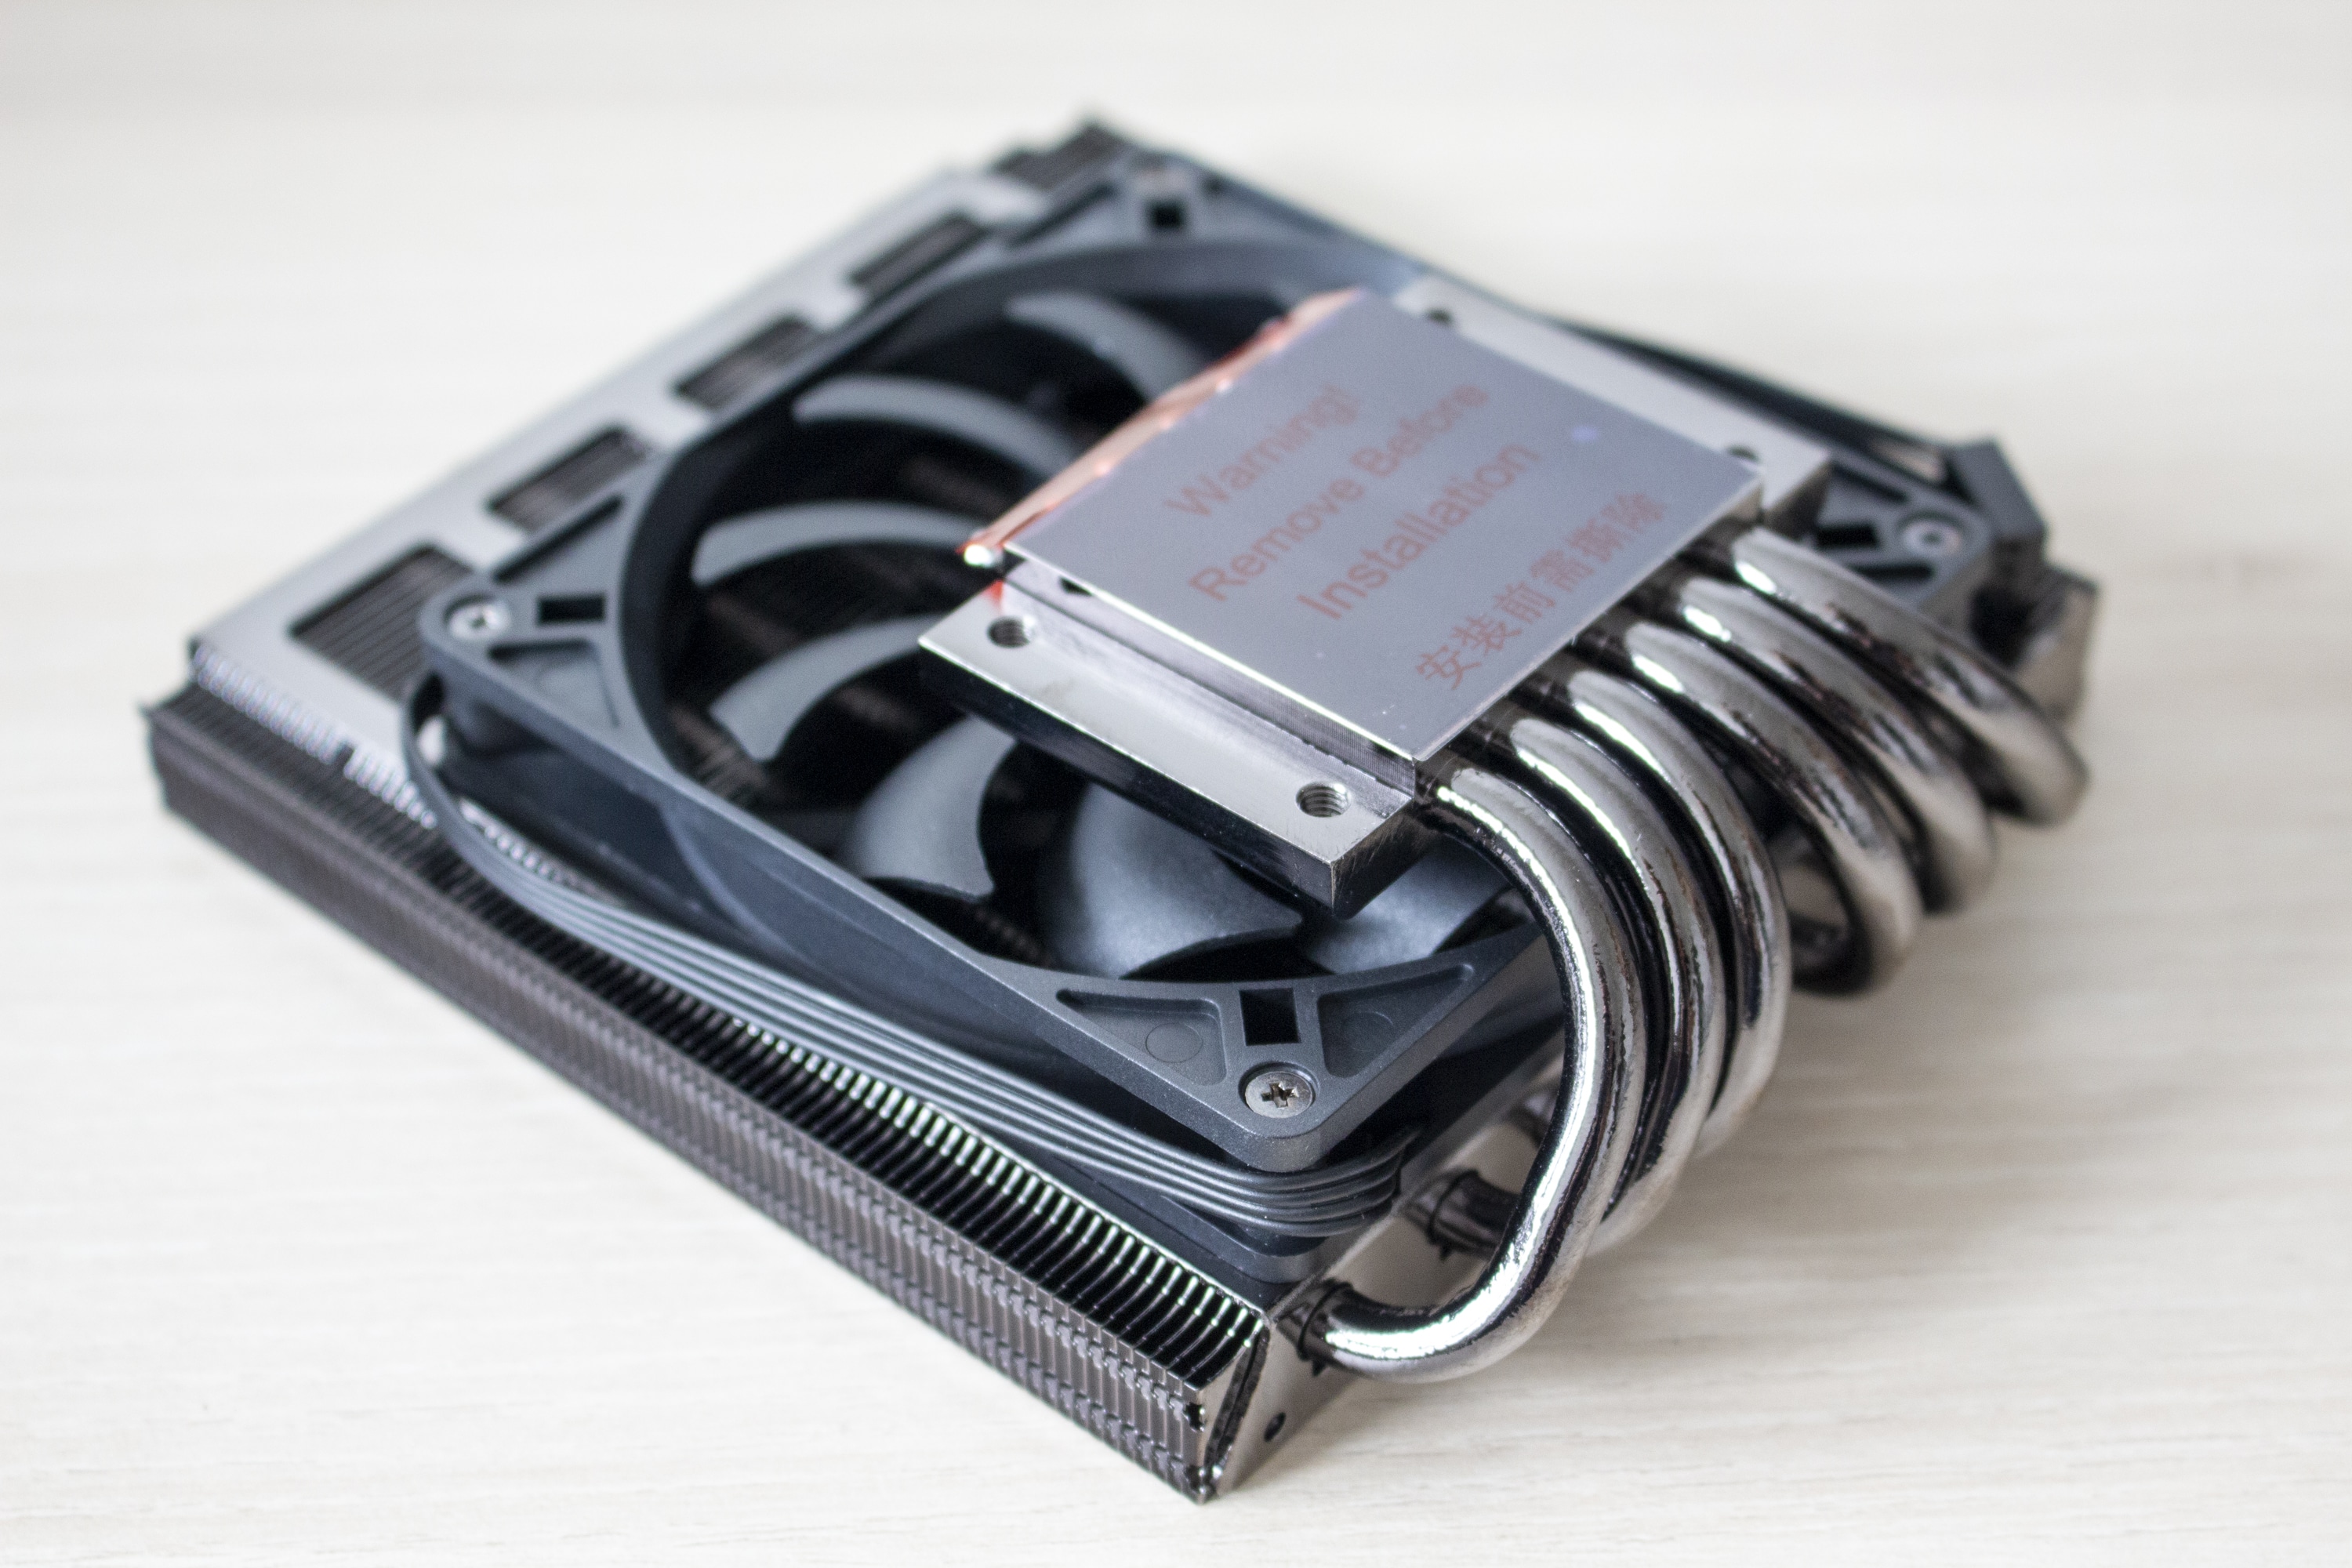 Alpenföhn Black Ridge - CPU cooler for ITX systems with 